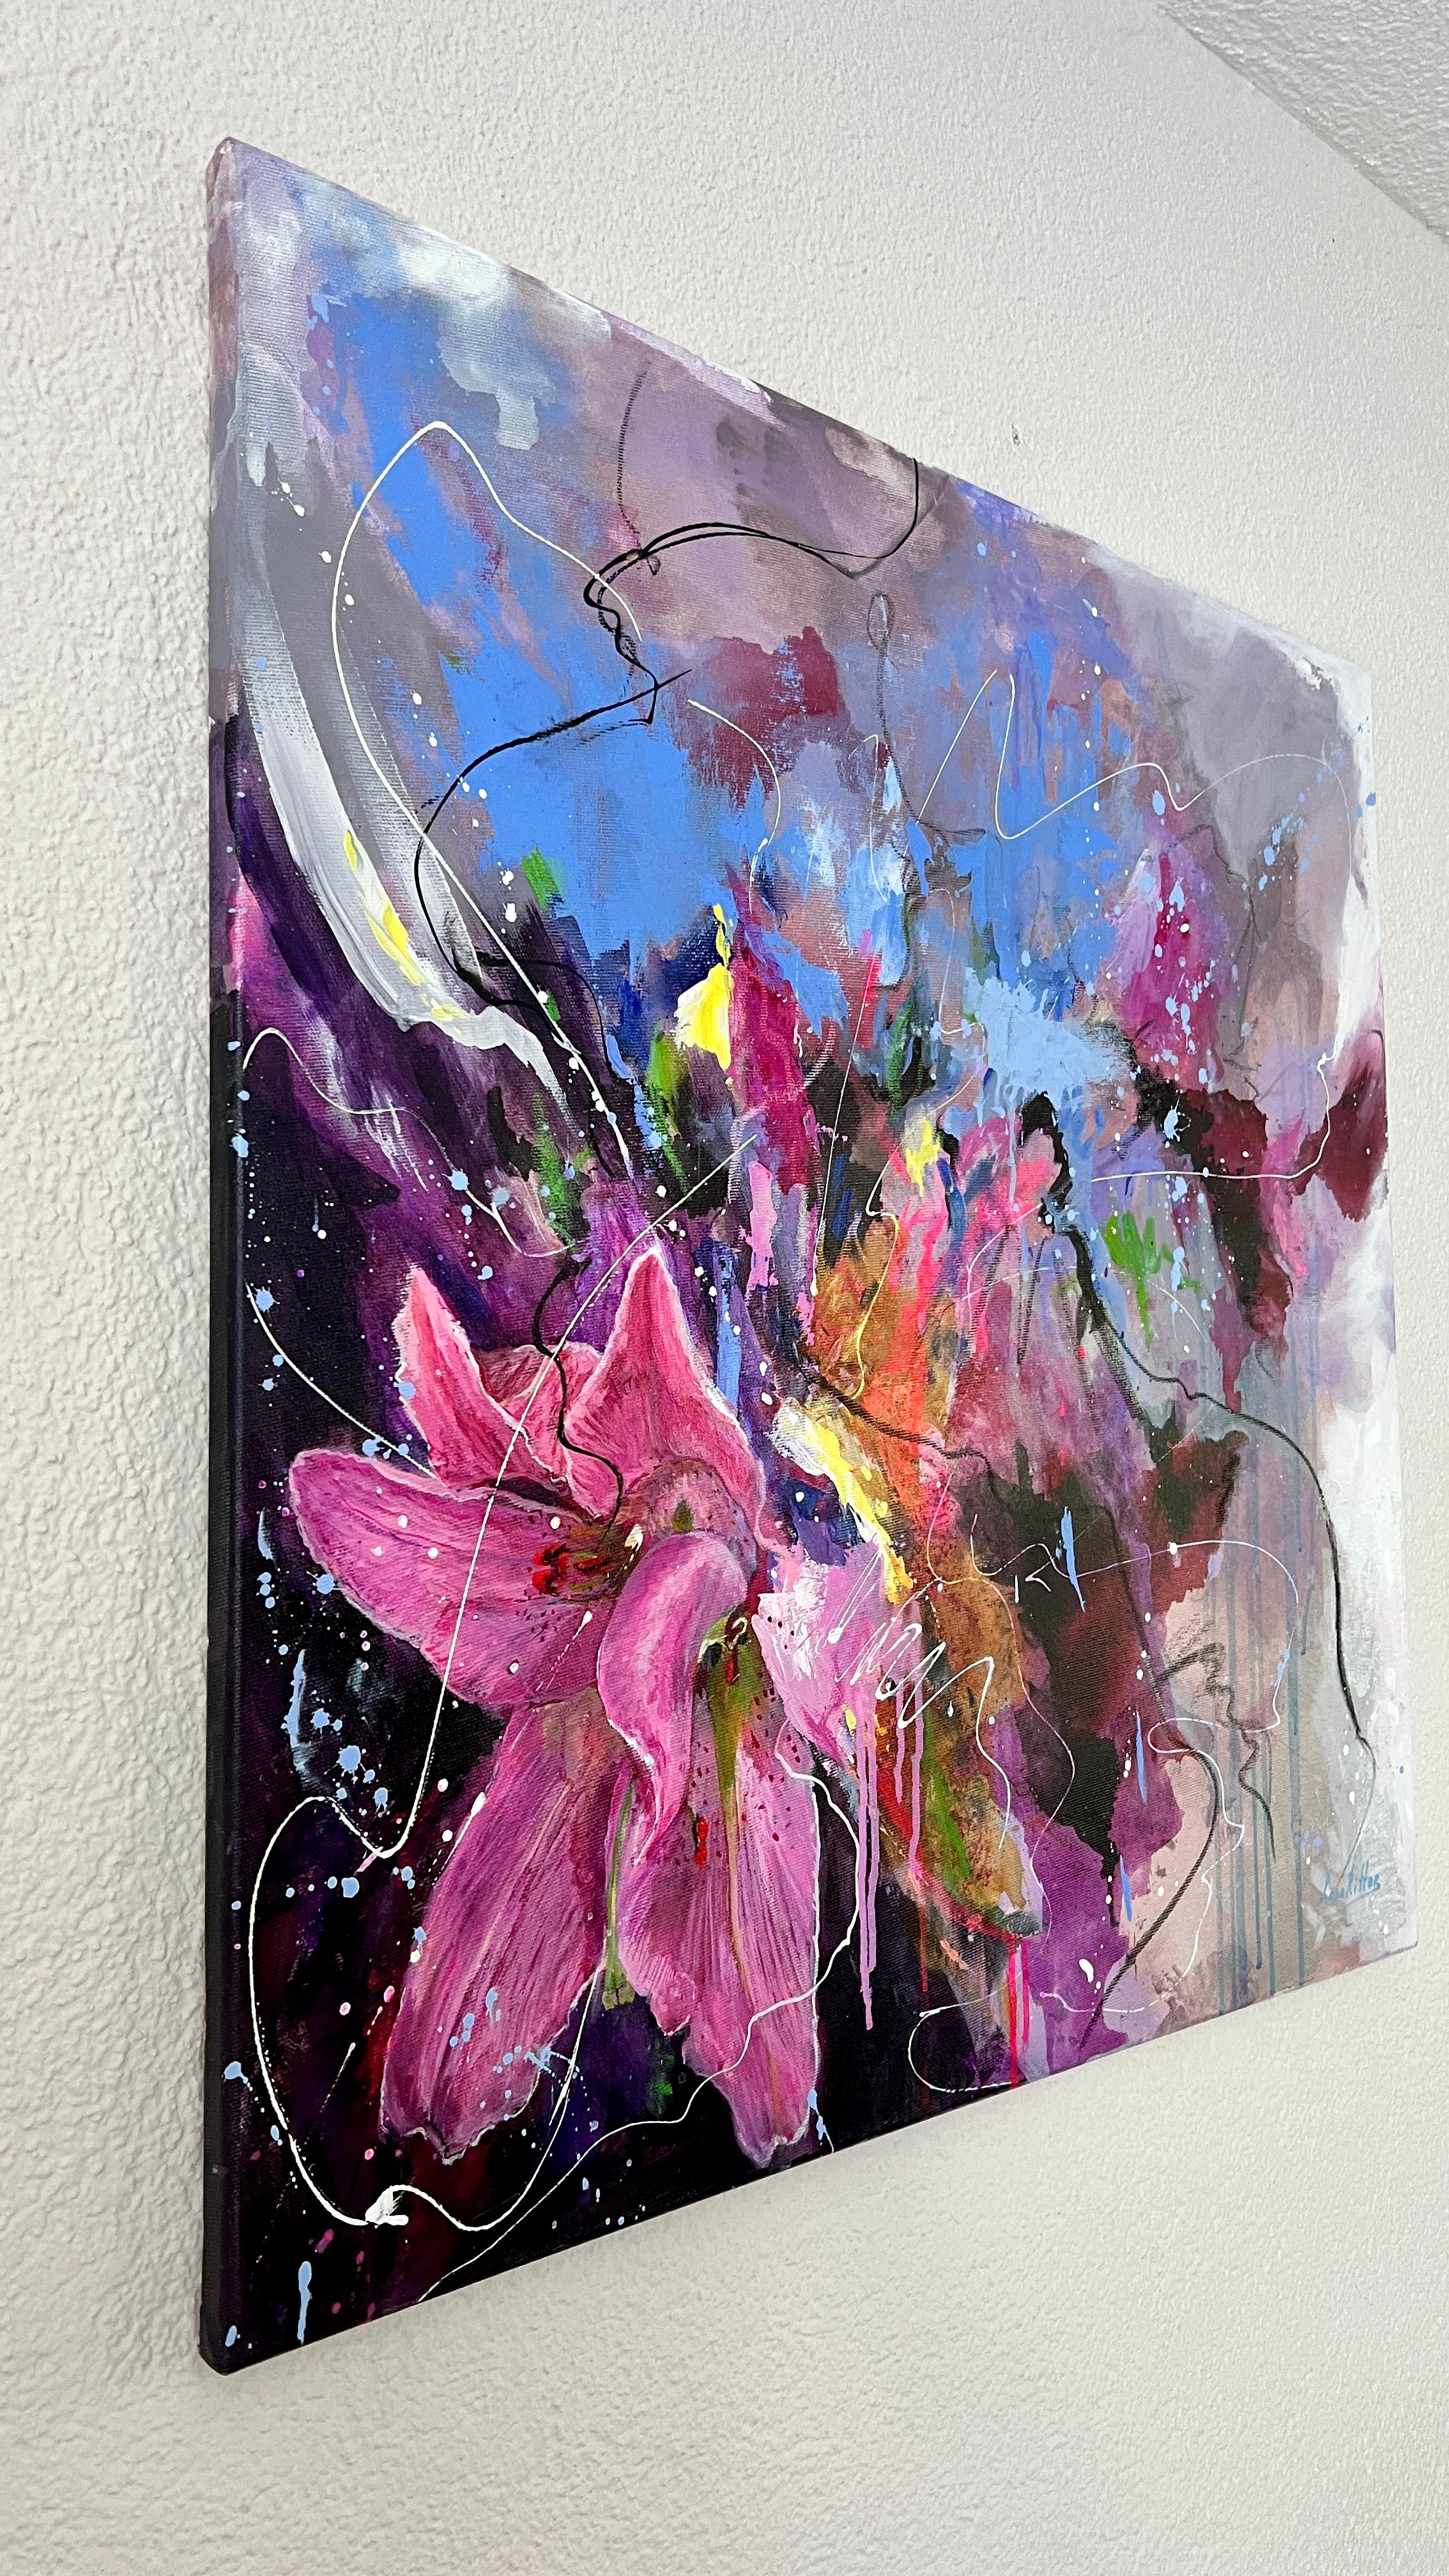 This expressive and stunning abstraction is enriched with a big lily flower painted in a realistic style.
The artist designedly created an abstract painting that`s both chaotic and breathtakingly beautiful. The soaring in the sky wonderful strokes,